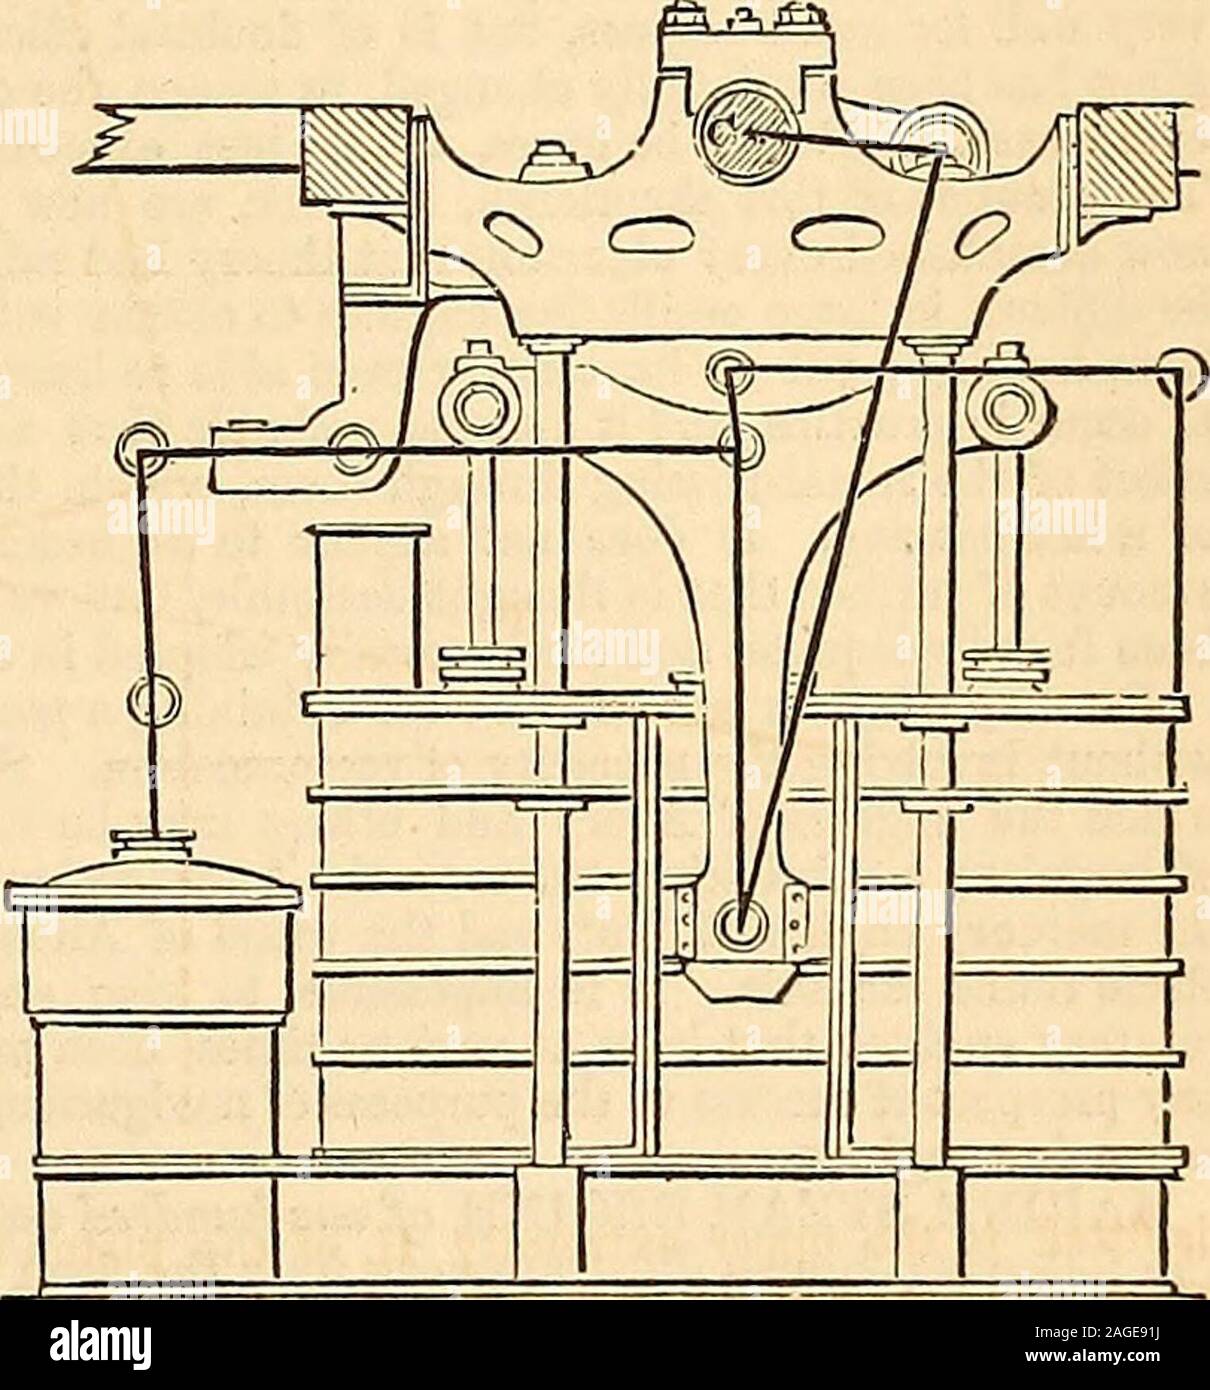 . Appleton's dictionary of machines, mechanics, engine-work, and engineering. BCD, called (from its form) the T-plate; the lower end C of the T-plate is attached to the connecting-rod C E, which again being connected with the crank E F communicates with the paddle-shaft F. Thecondenser G is underneath the cylinders. It is clear that if steam be admitted below both pistons at thesame time, the pistons, in rising, will force up the T-plate, and with it the connecting-rod, &lt;fec.; and conversely these will again descend as the2732 piston is forced down. Hence the workingpart of the engine can b Stock Photo